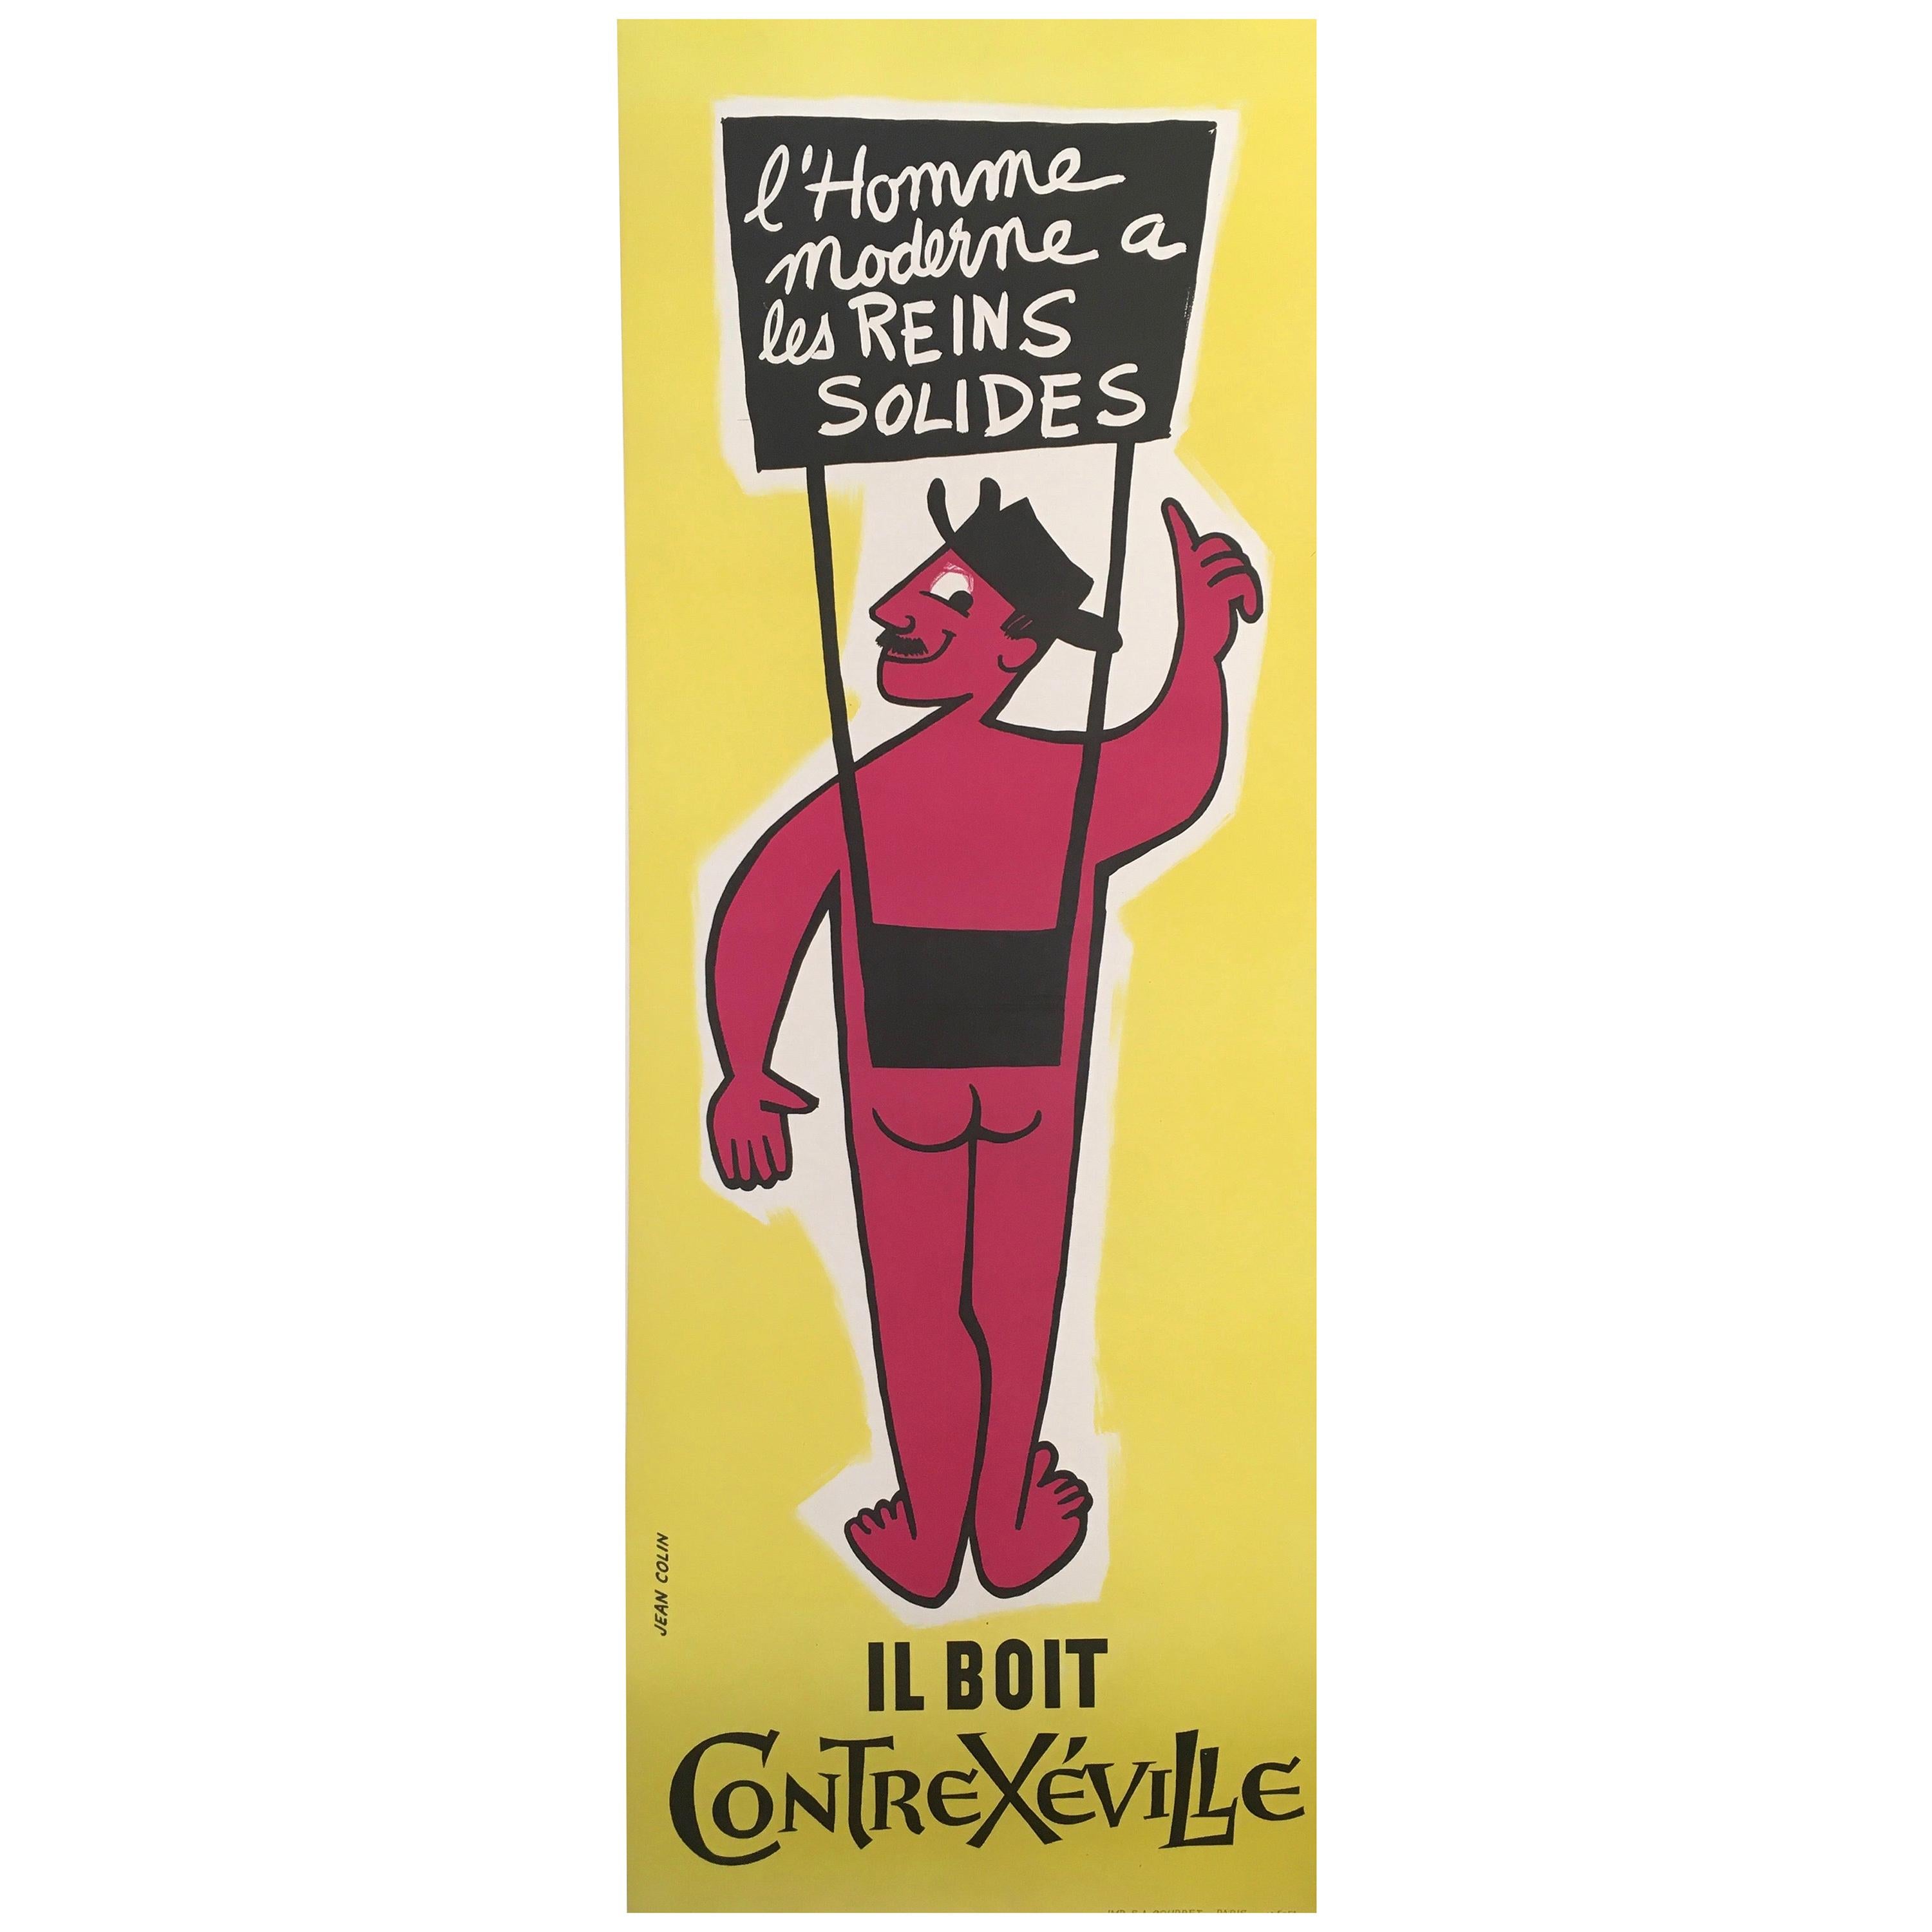 Original Vintage French Mineral Water Advertisement ContreXeville by Jean Colin